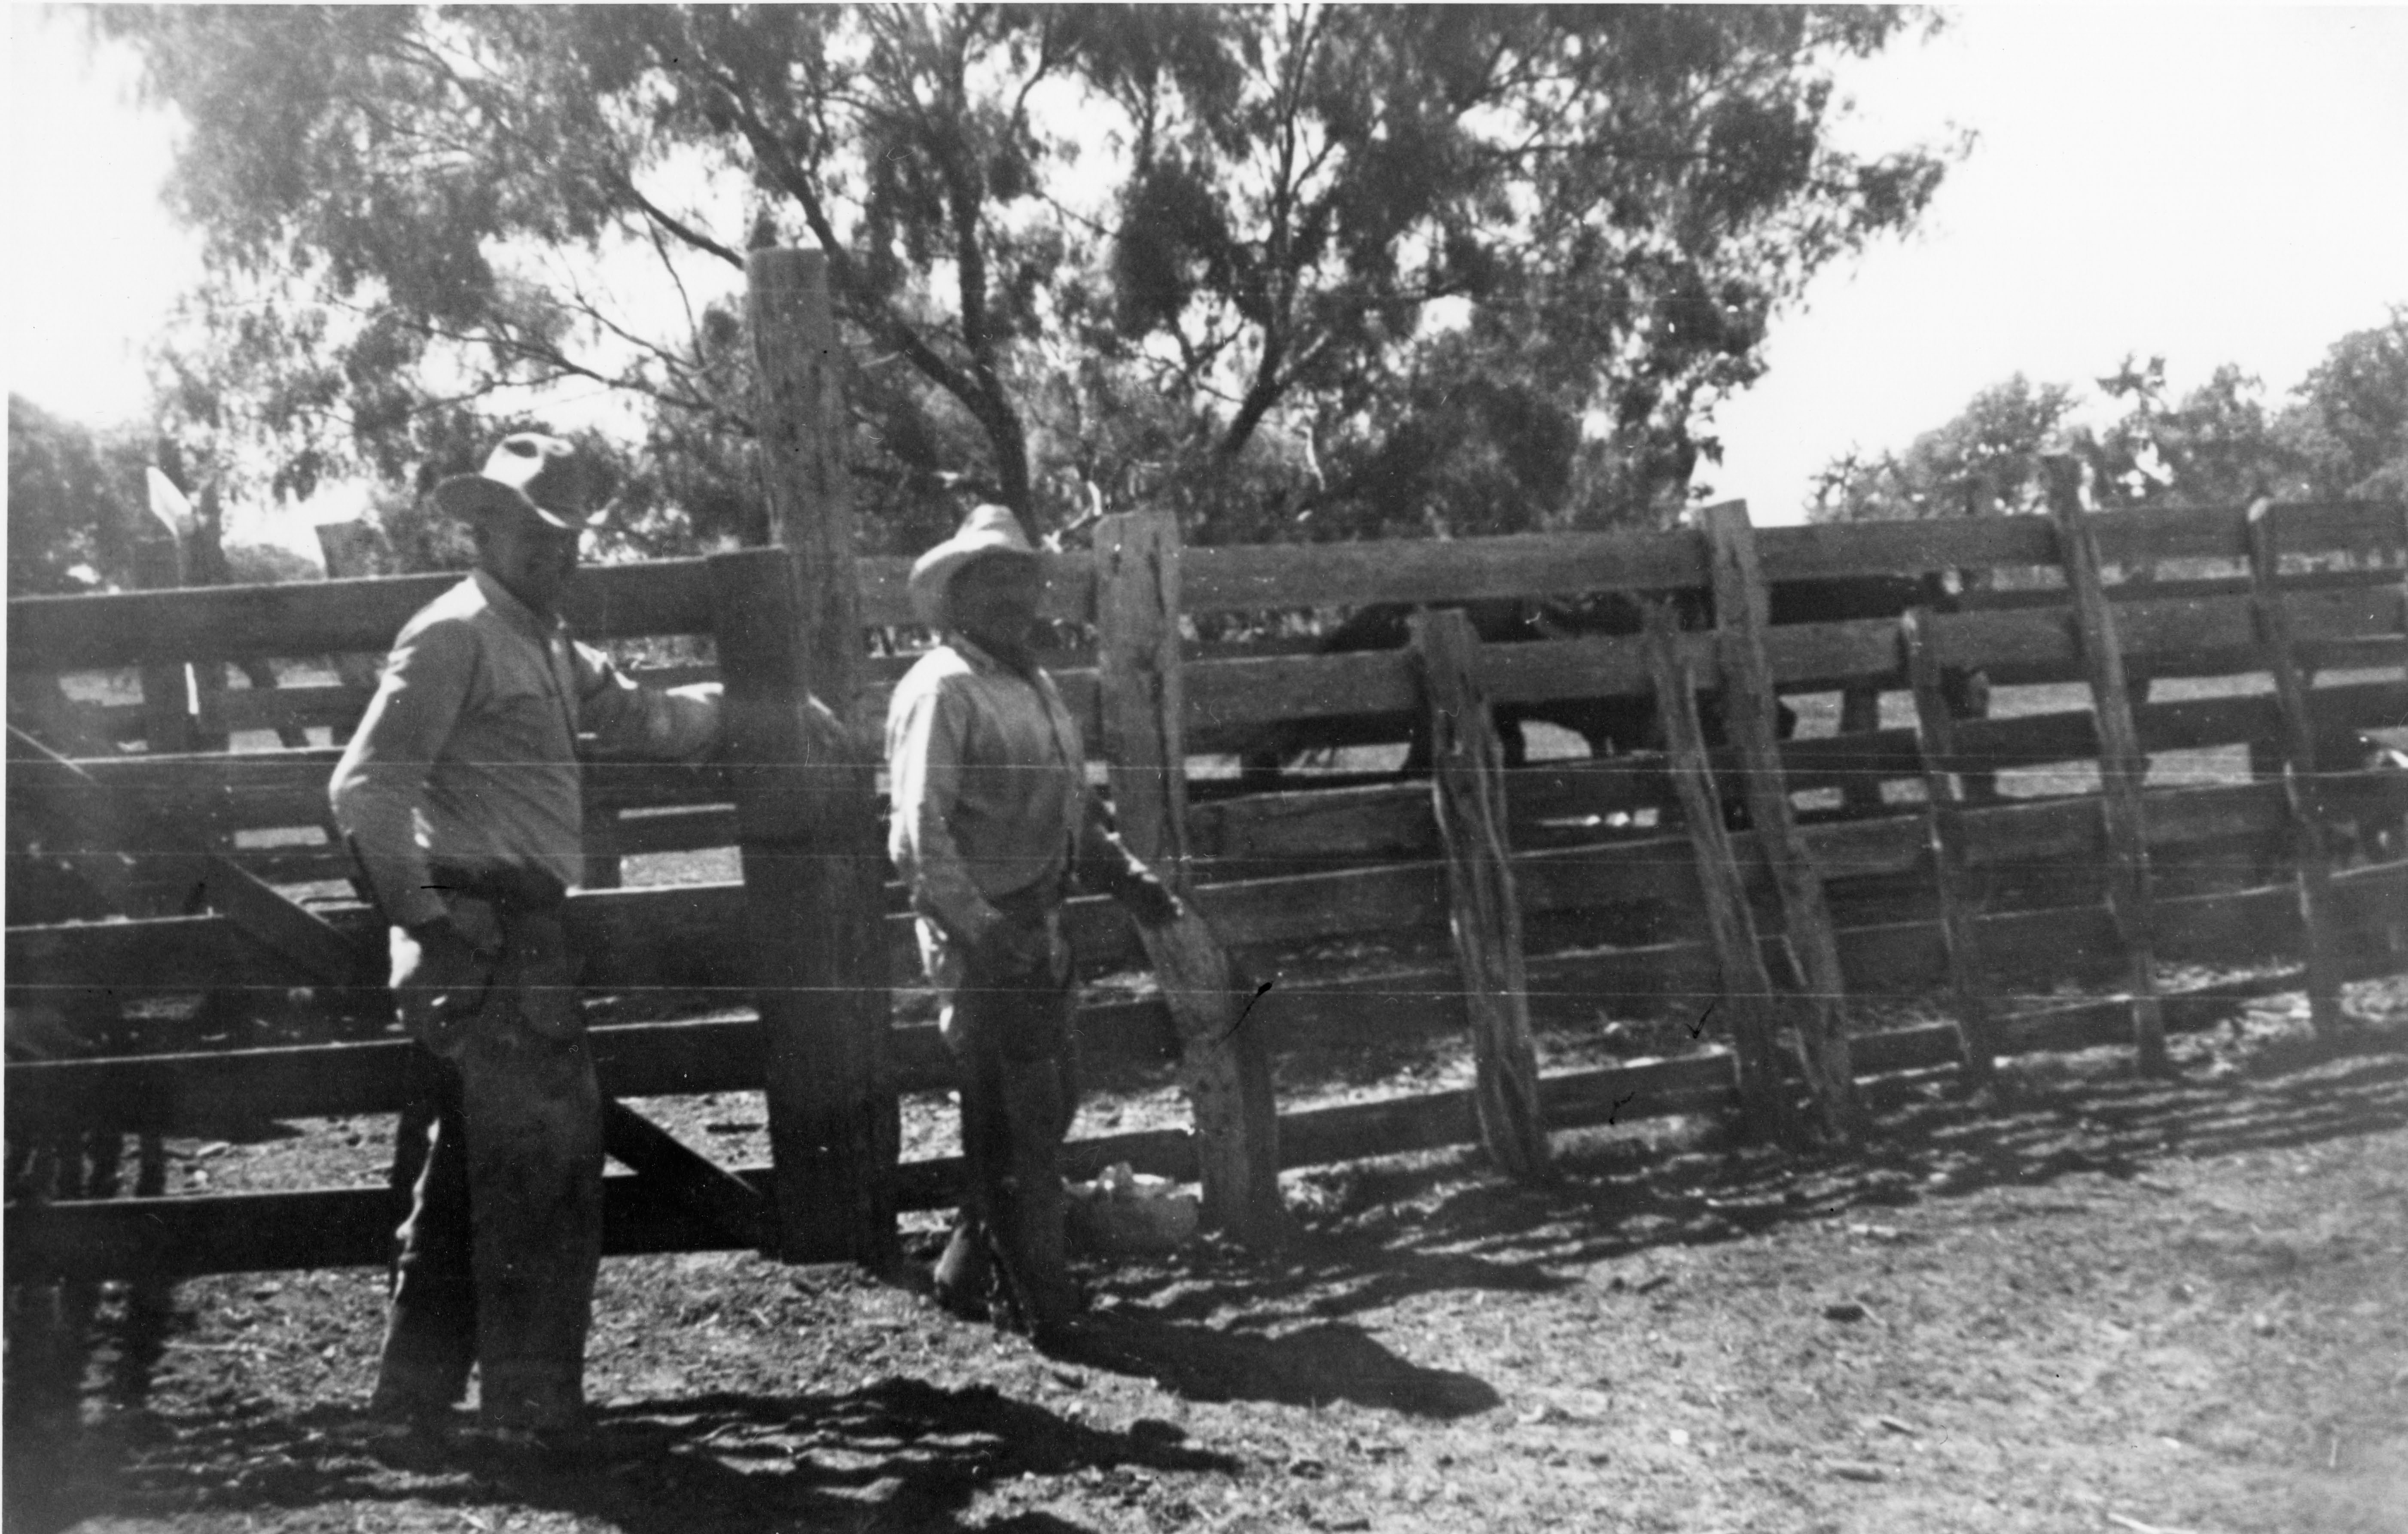 Dick and Alvina Hanley leaning on a fence in 1925. This photo is courtesy of the Louise O'Connor Collection.